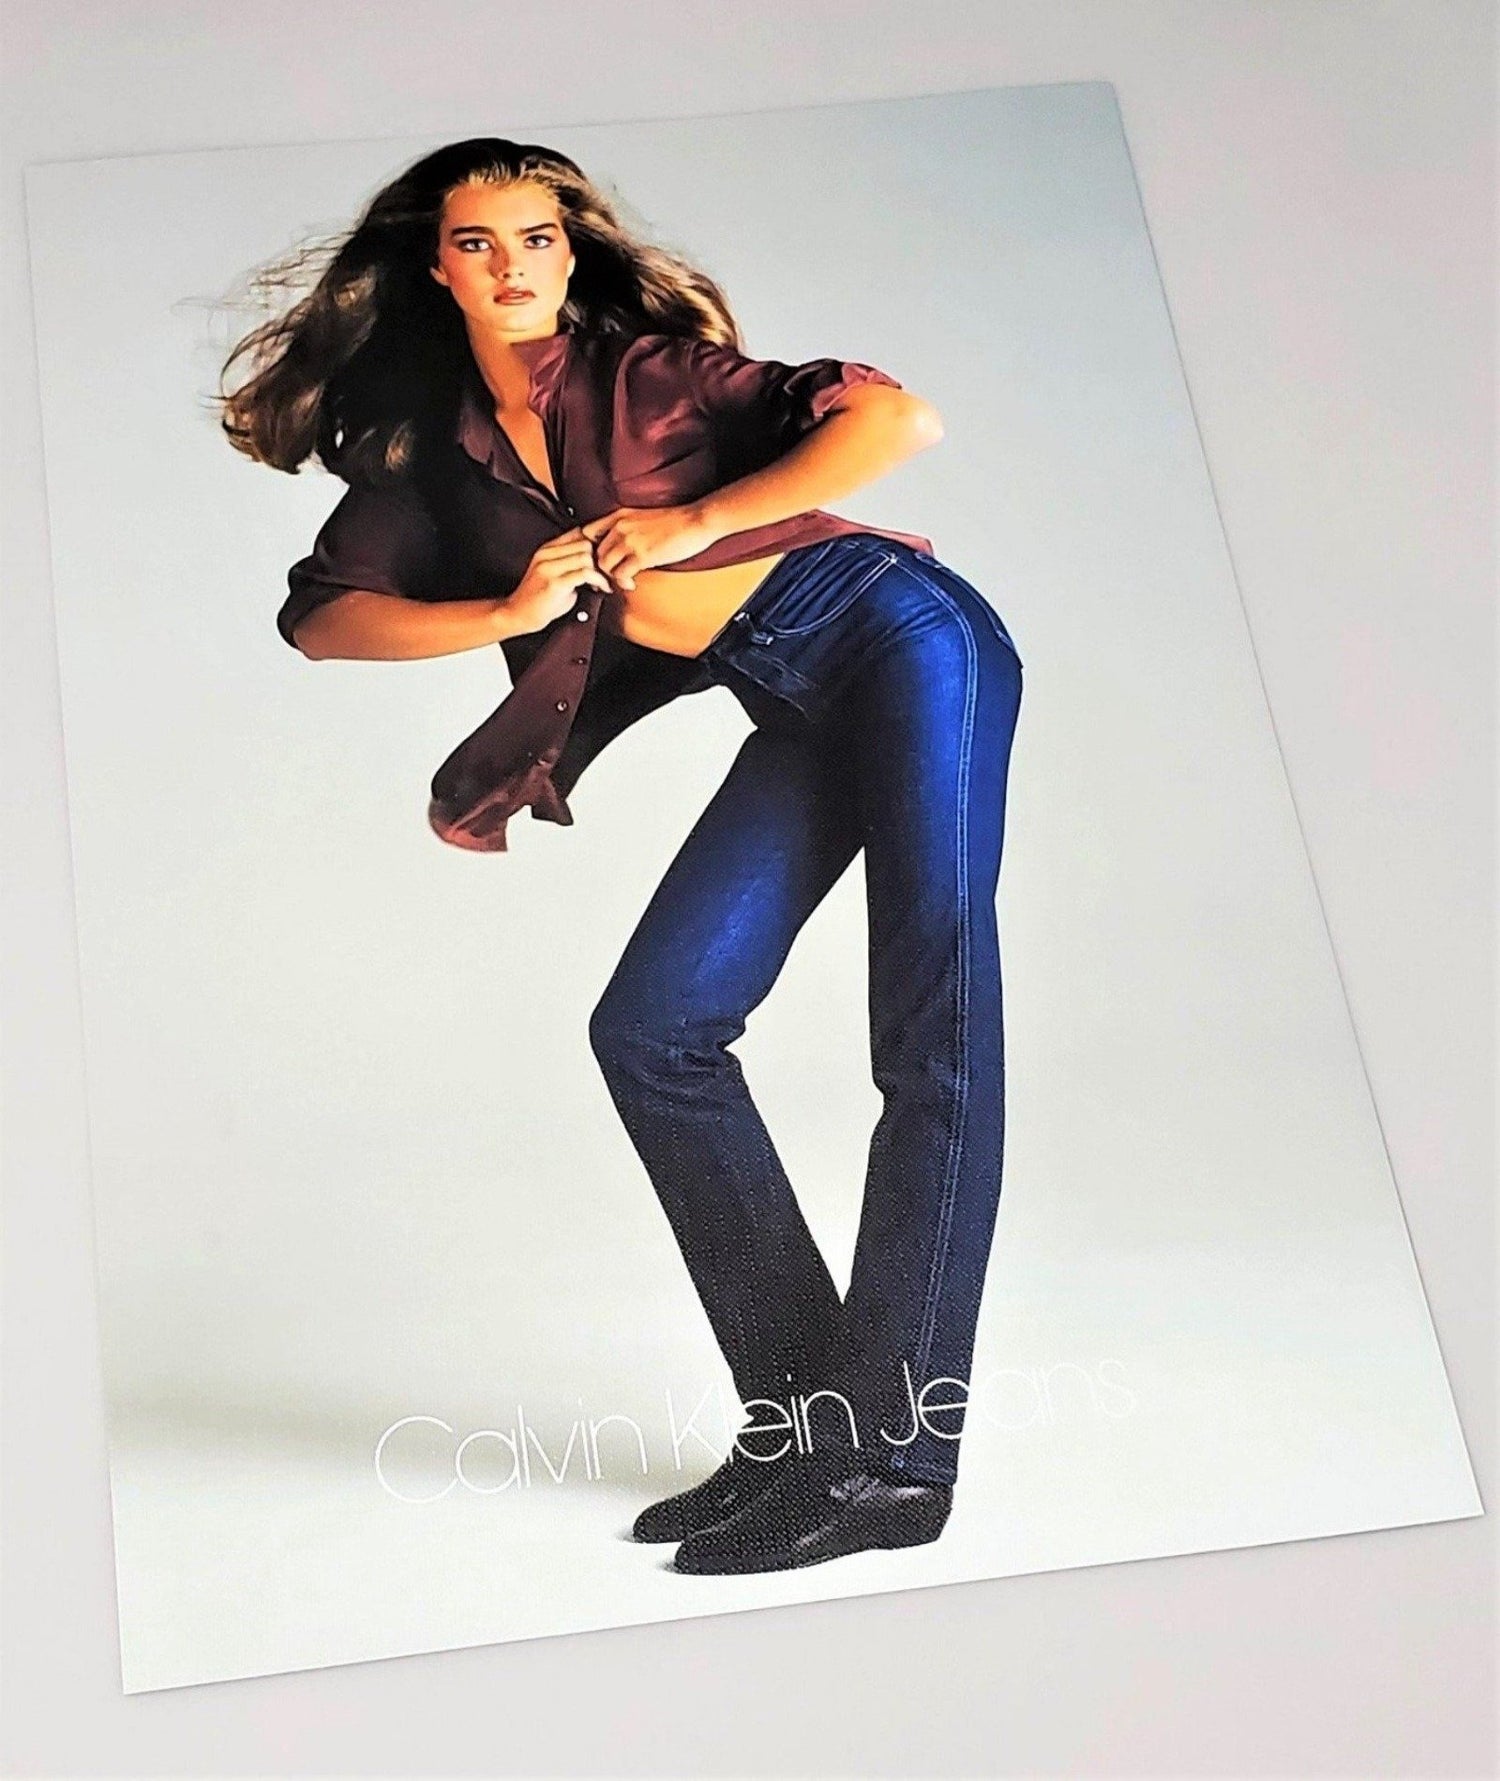 Brooke Shields Calvin Klein Ad Featured In 2019 Avedon Advertising Hardcover Book available in area51gallery